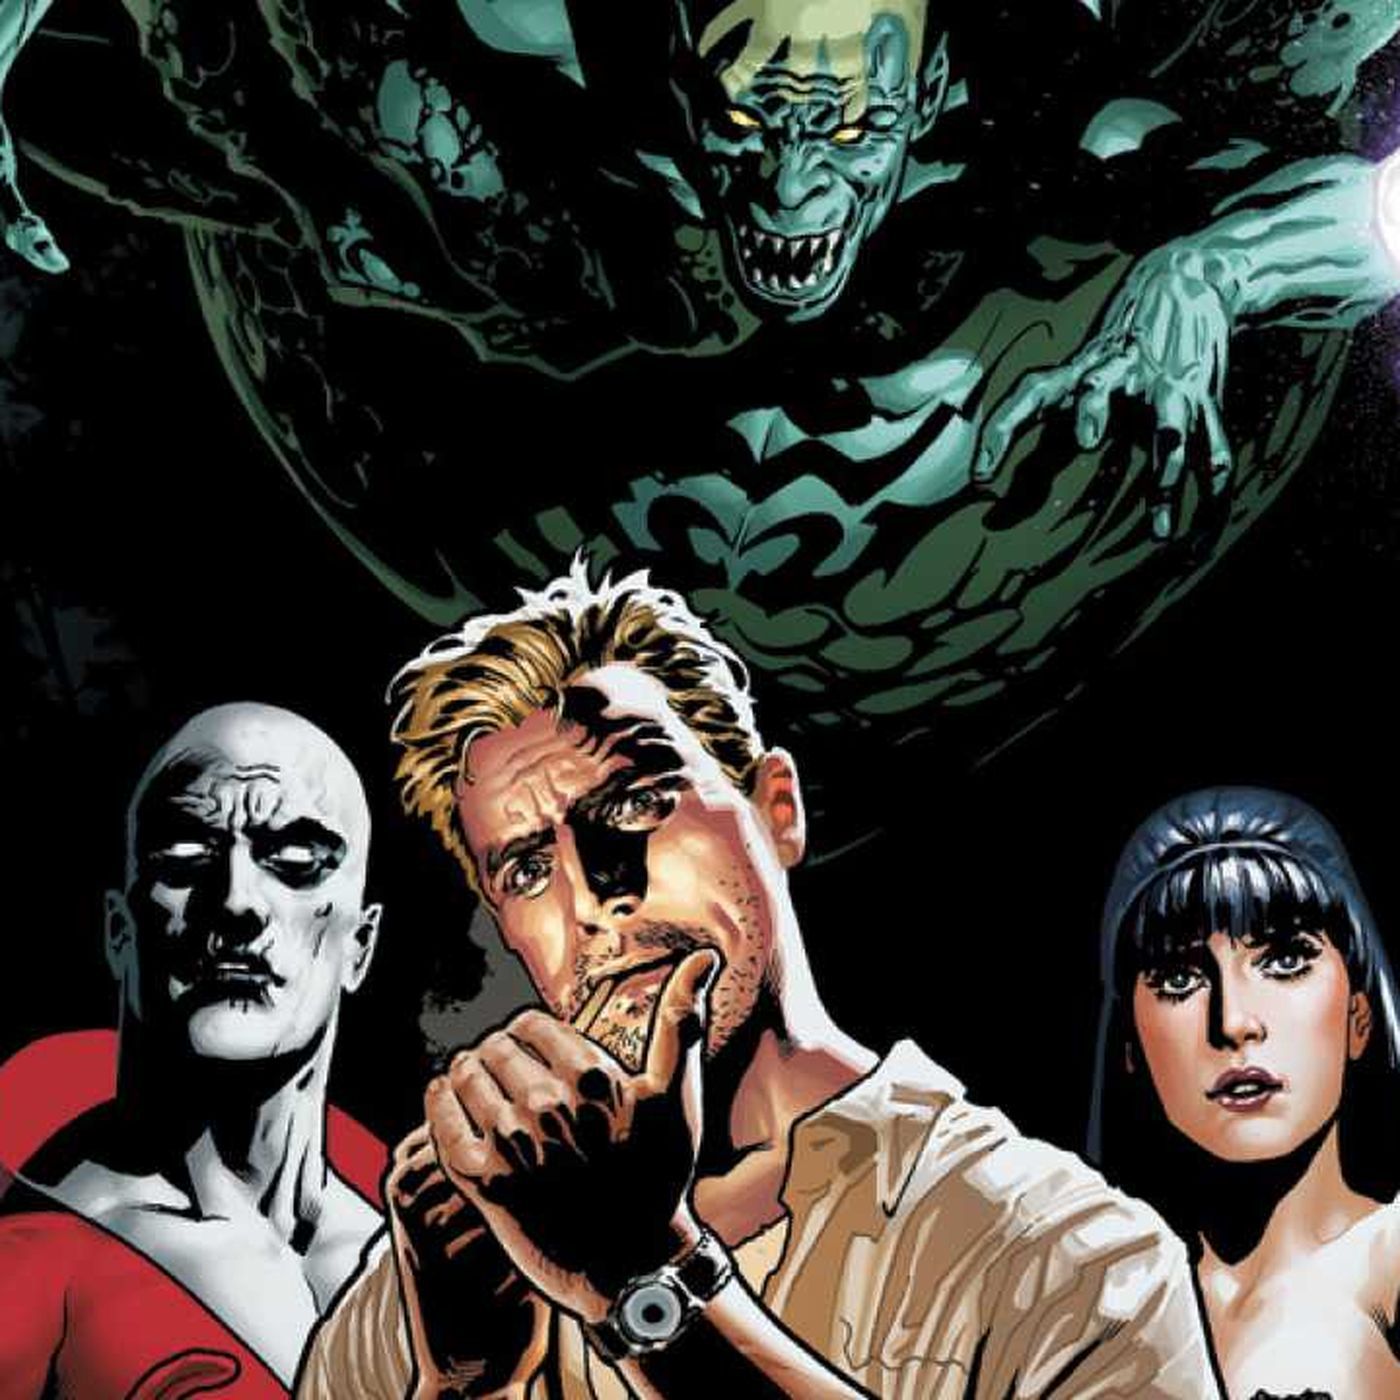 J.J. Abrams is producing a Justice League Dark series for HBO Max